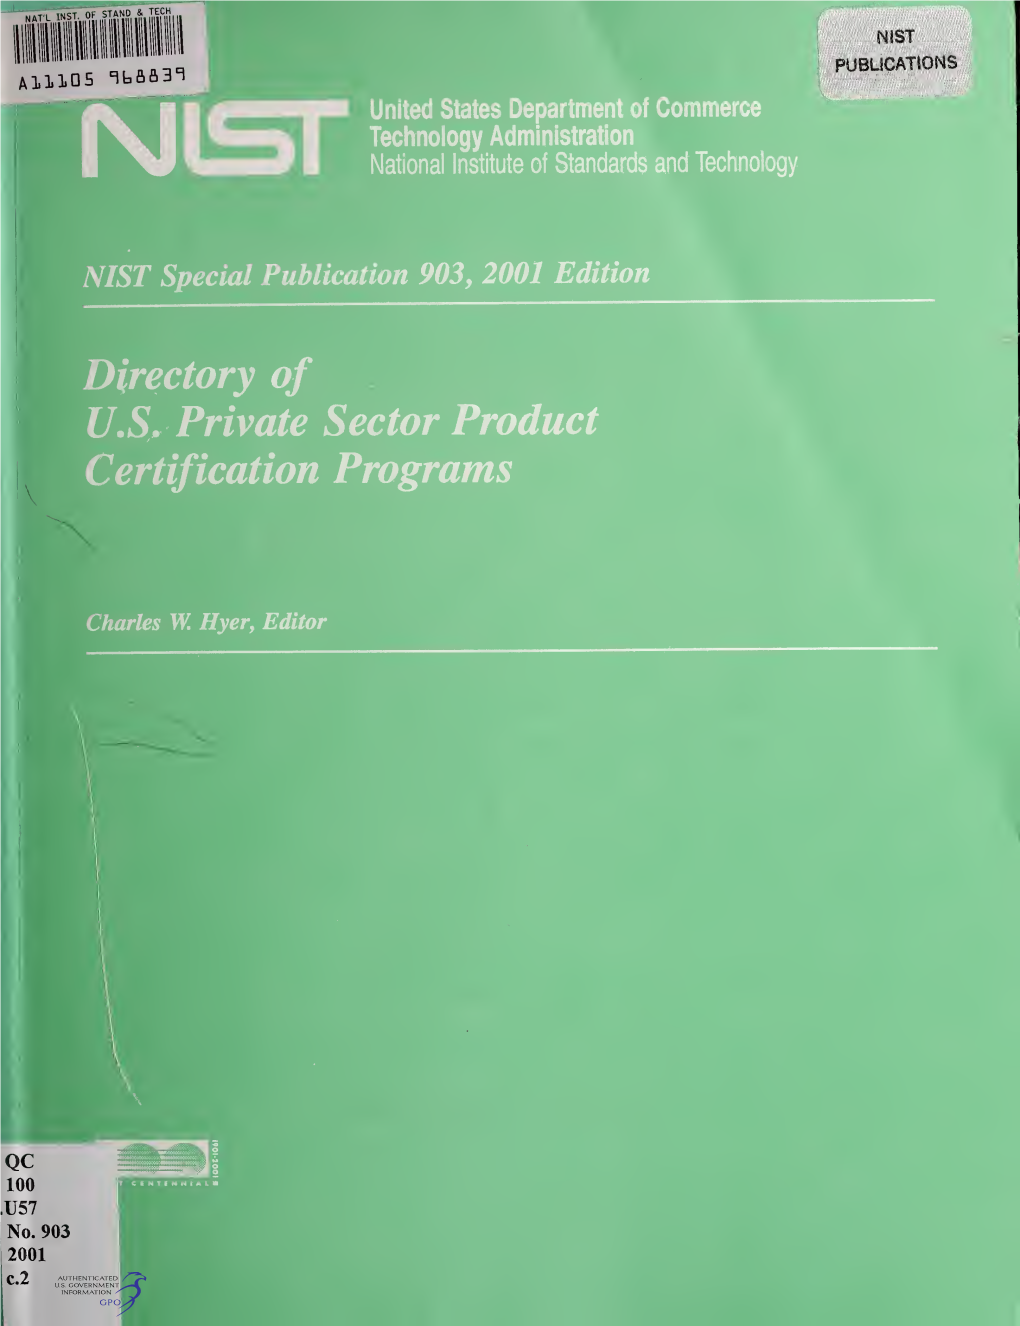 Directory of U.S. Private Sector Product Certification Programs